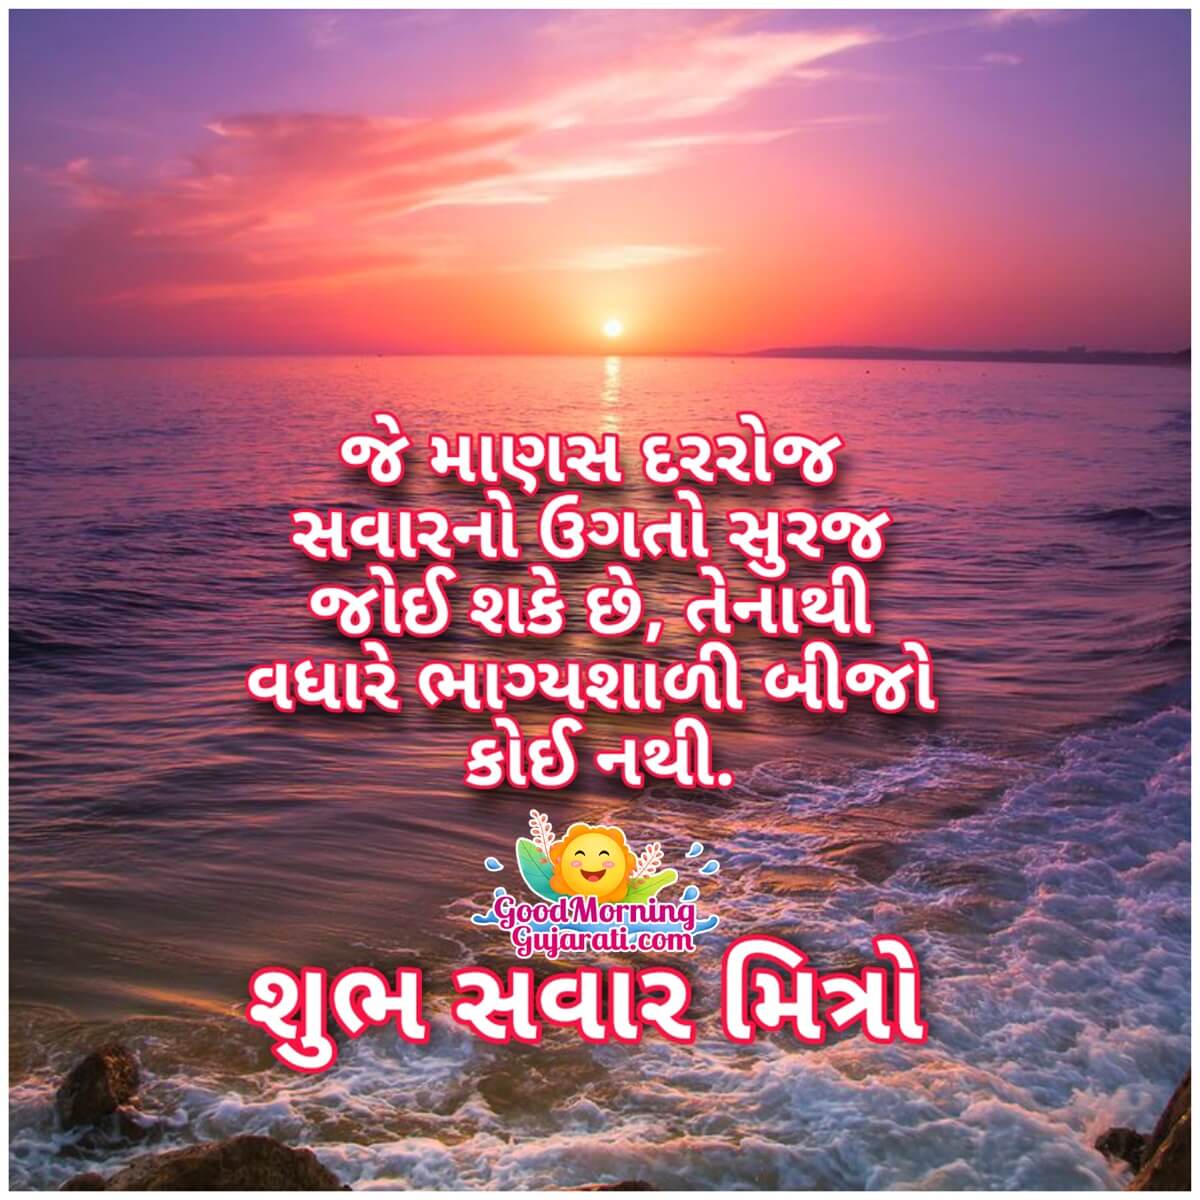 Good Morning Messages To Friends In Gujarati - Good Morning Wishes & Images In Gujarati